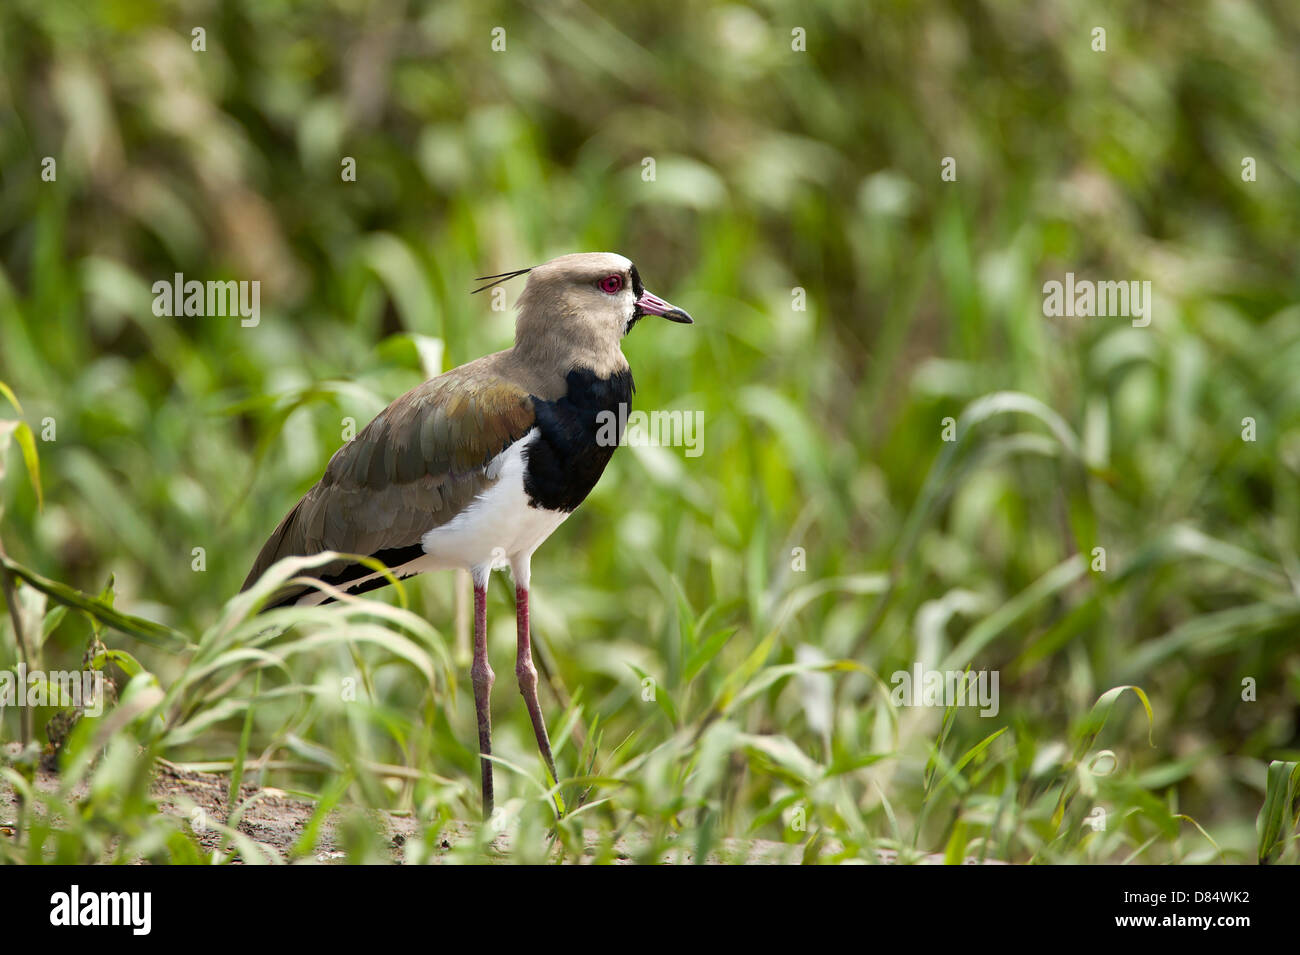 Southern Lapwing, bird walking in a mangrove in Costa Rica, Central America Stock Photo